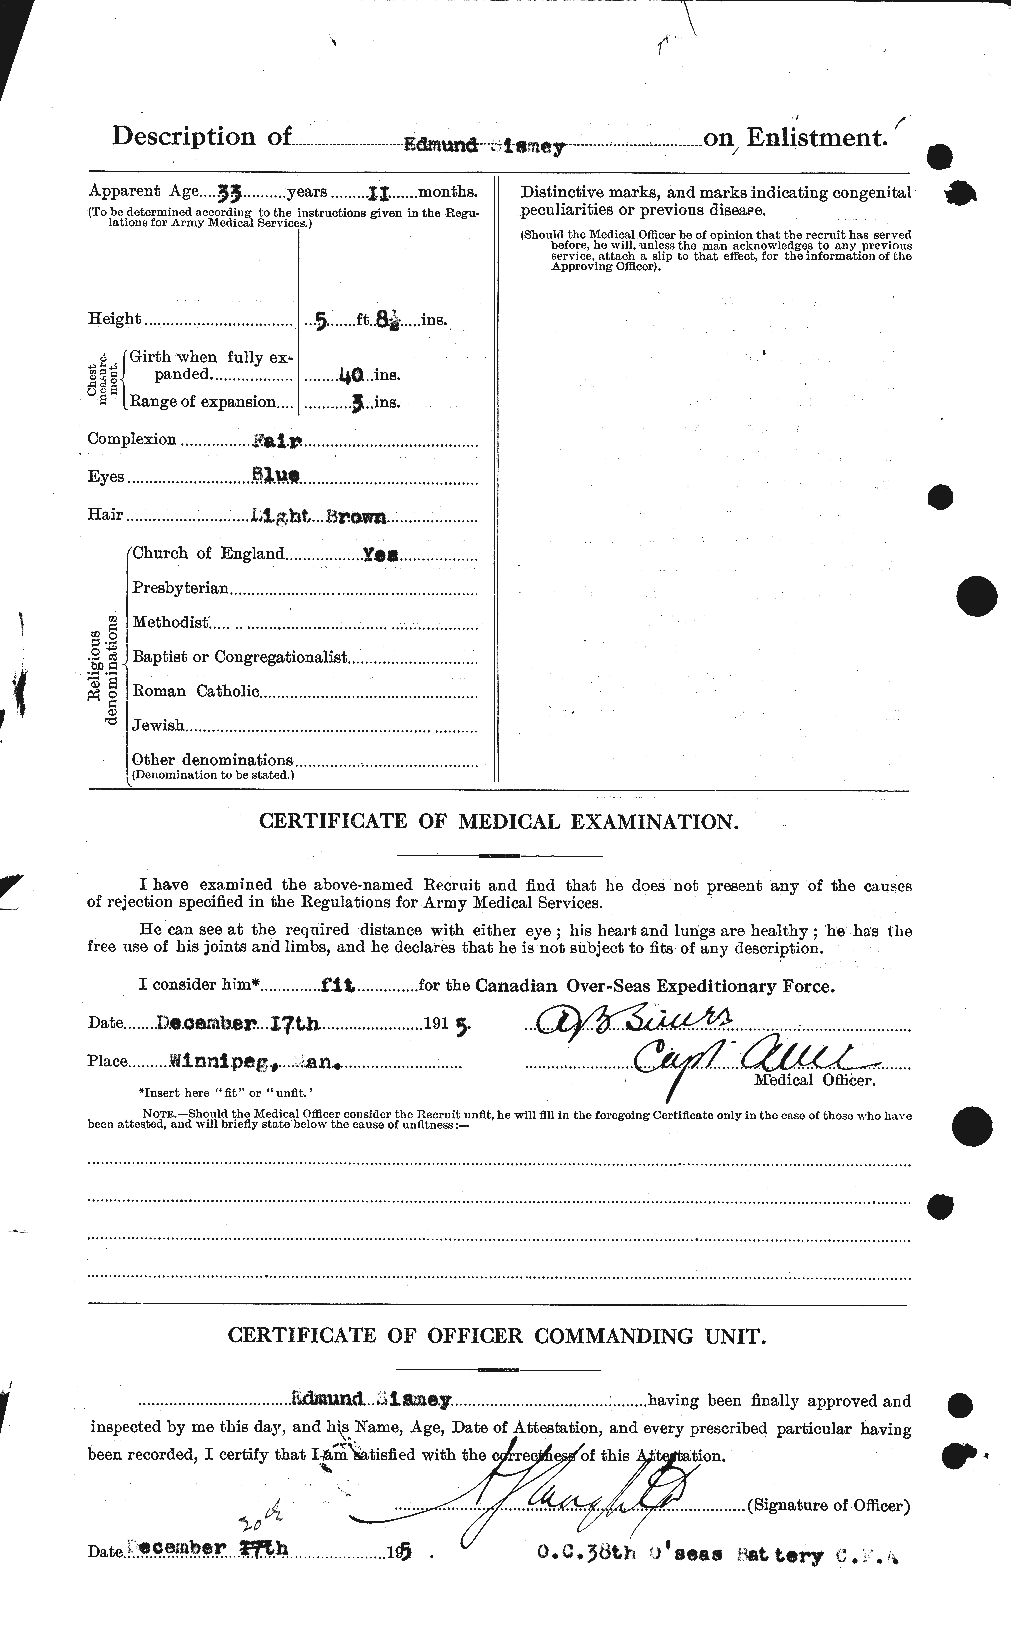 Personnel Records of the First World War - CEF 099554b